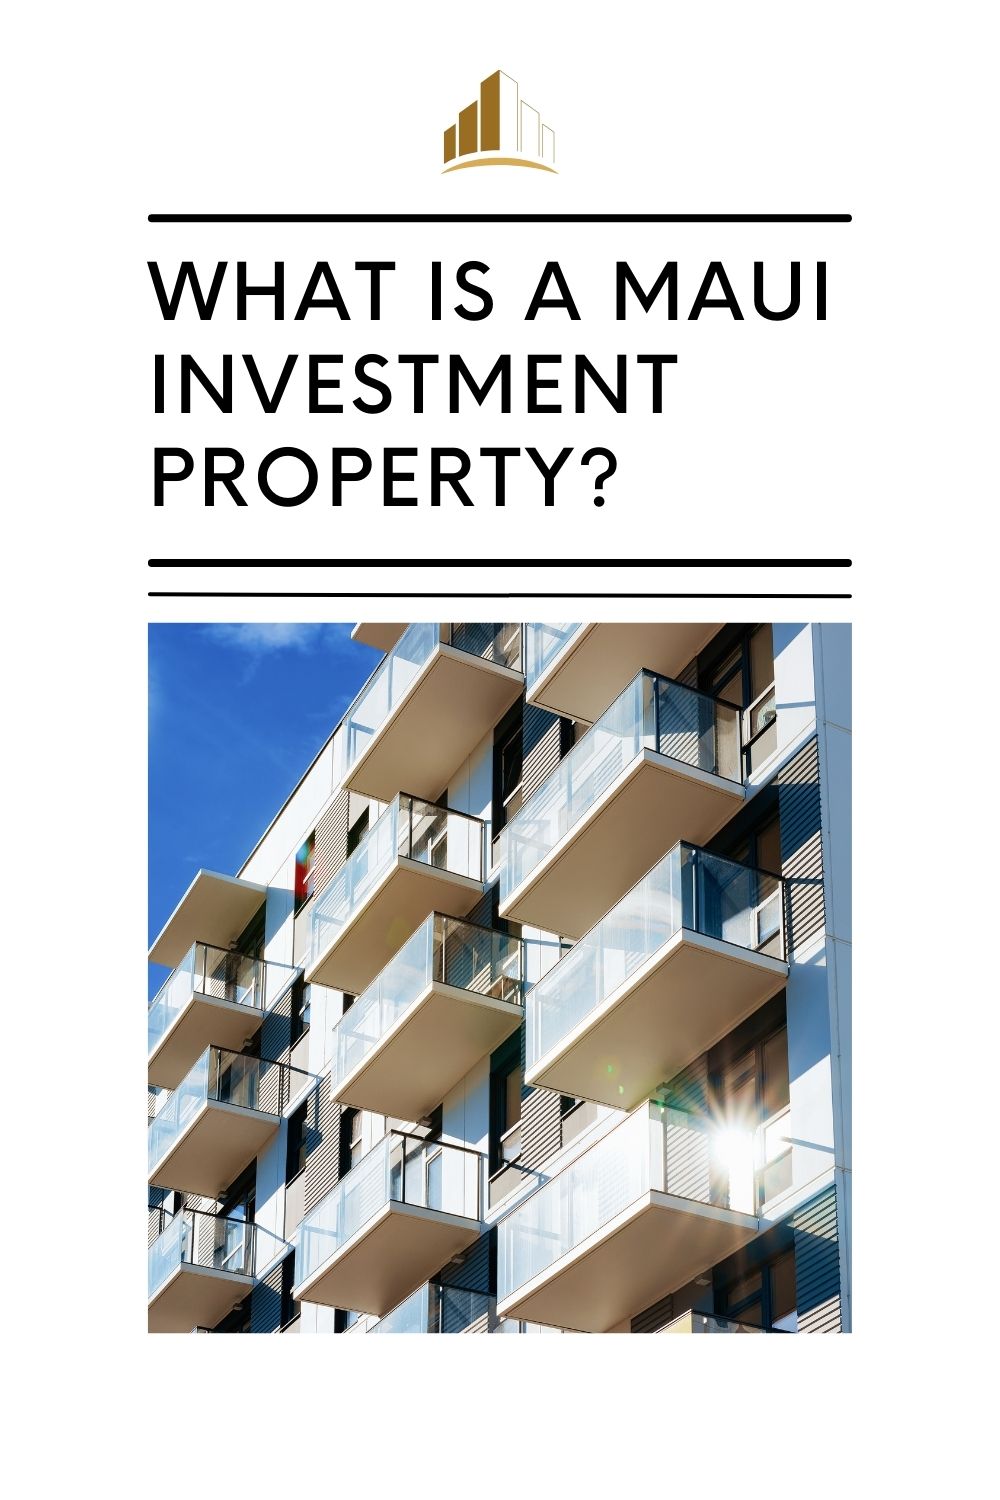 What is a Maui Investment Property?